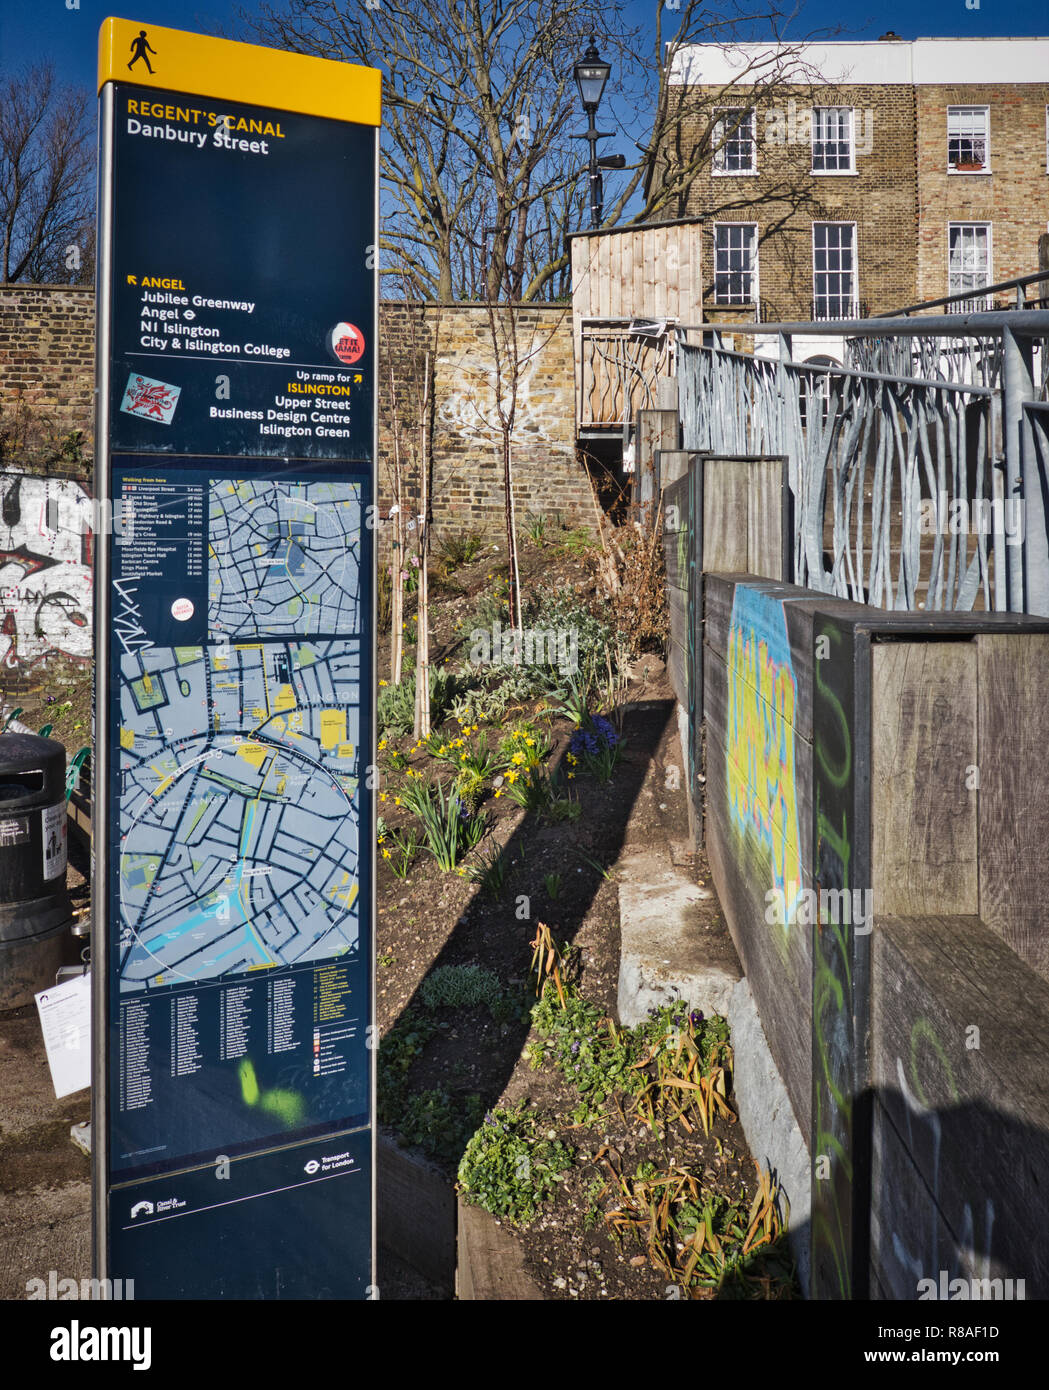 You are here information map point on towpath by the Regent's Canal, Danbury Street, Islington, London, United Kingdom Stock Photo